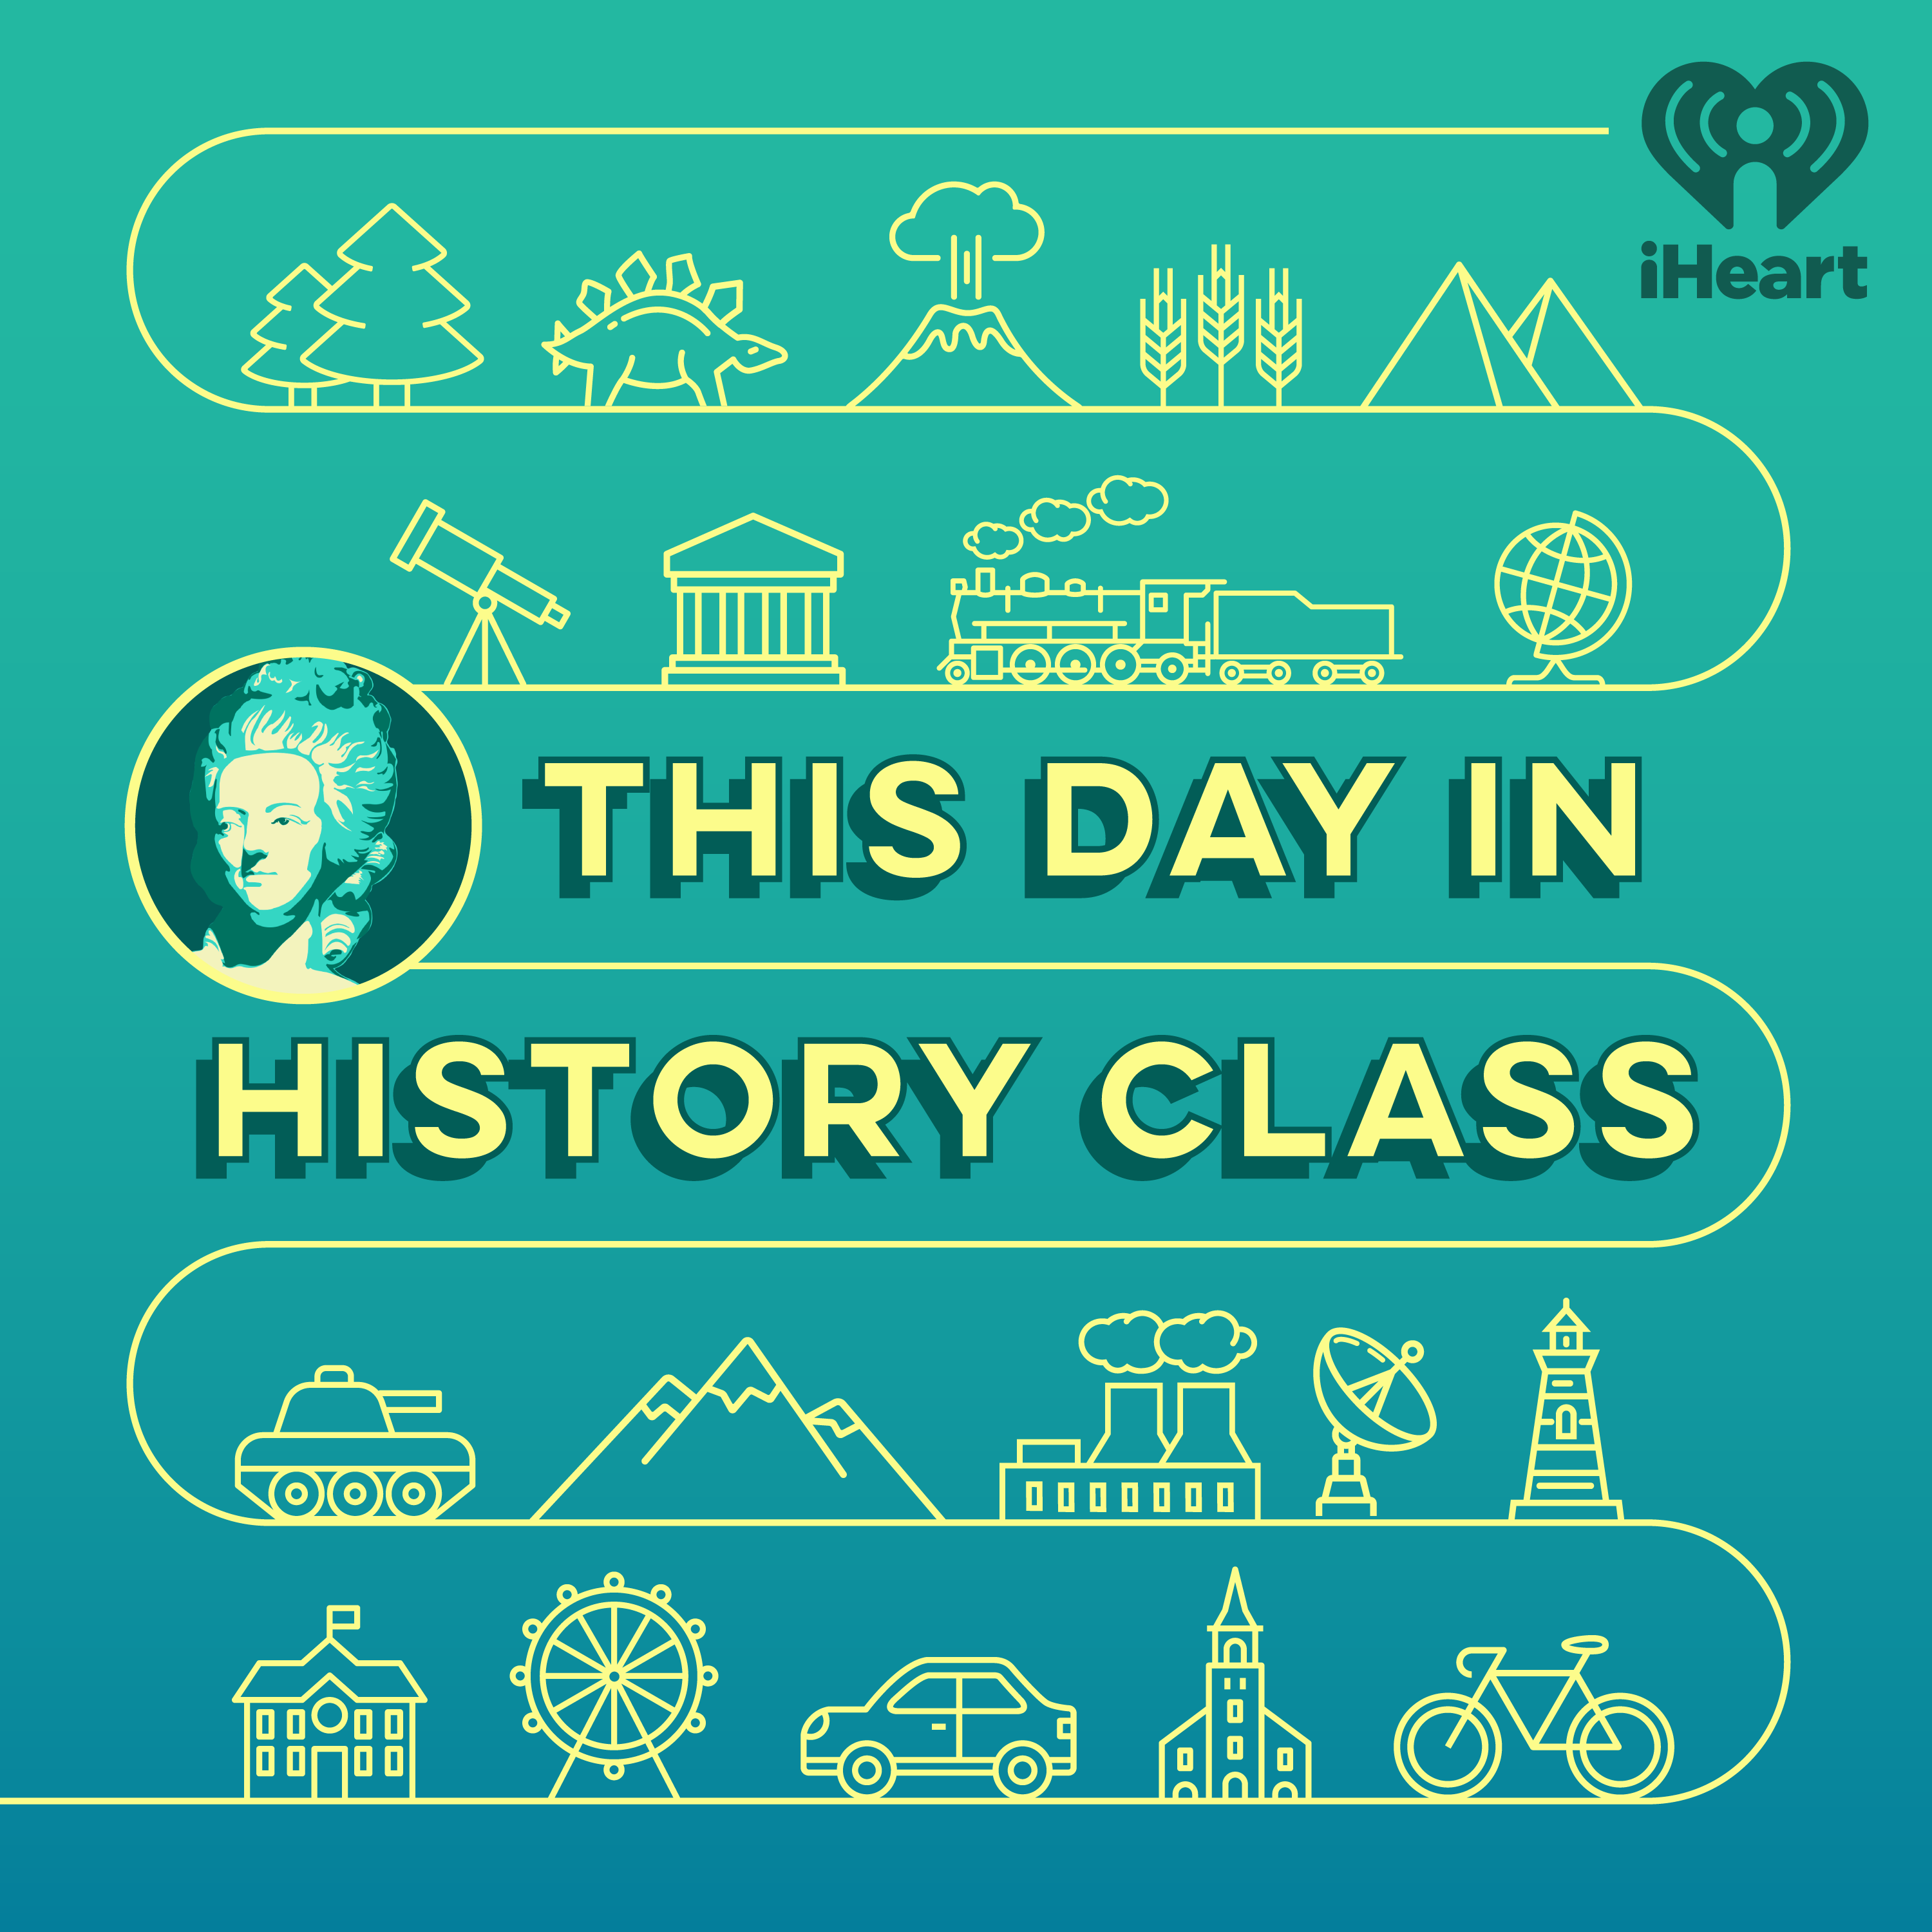 This Day In History Class - December 18th